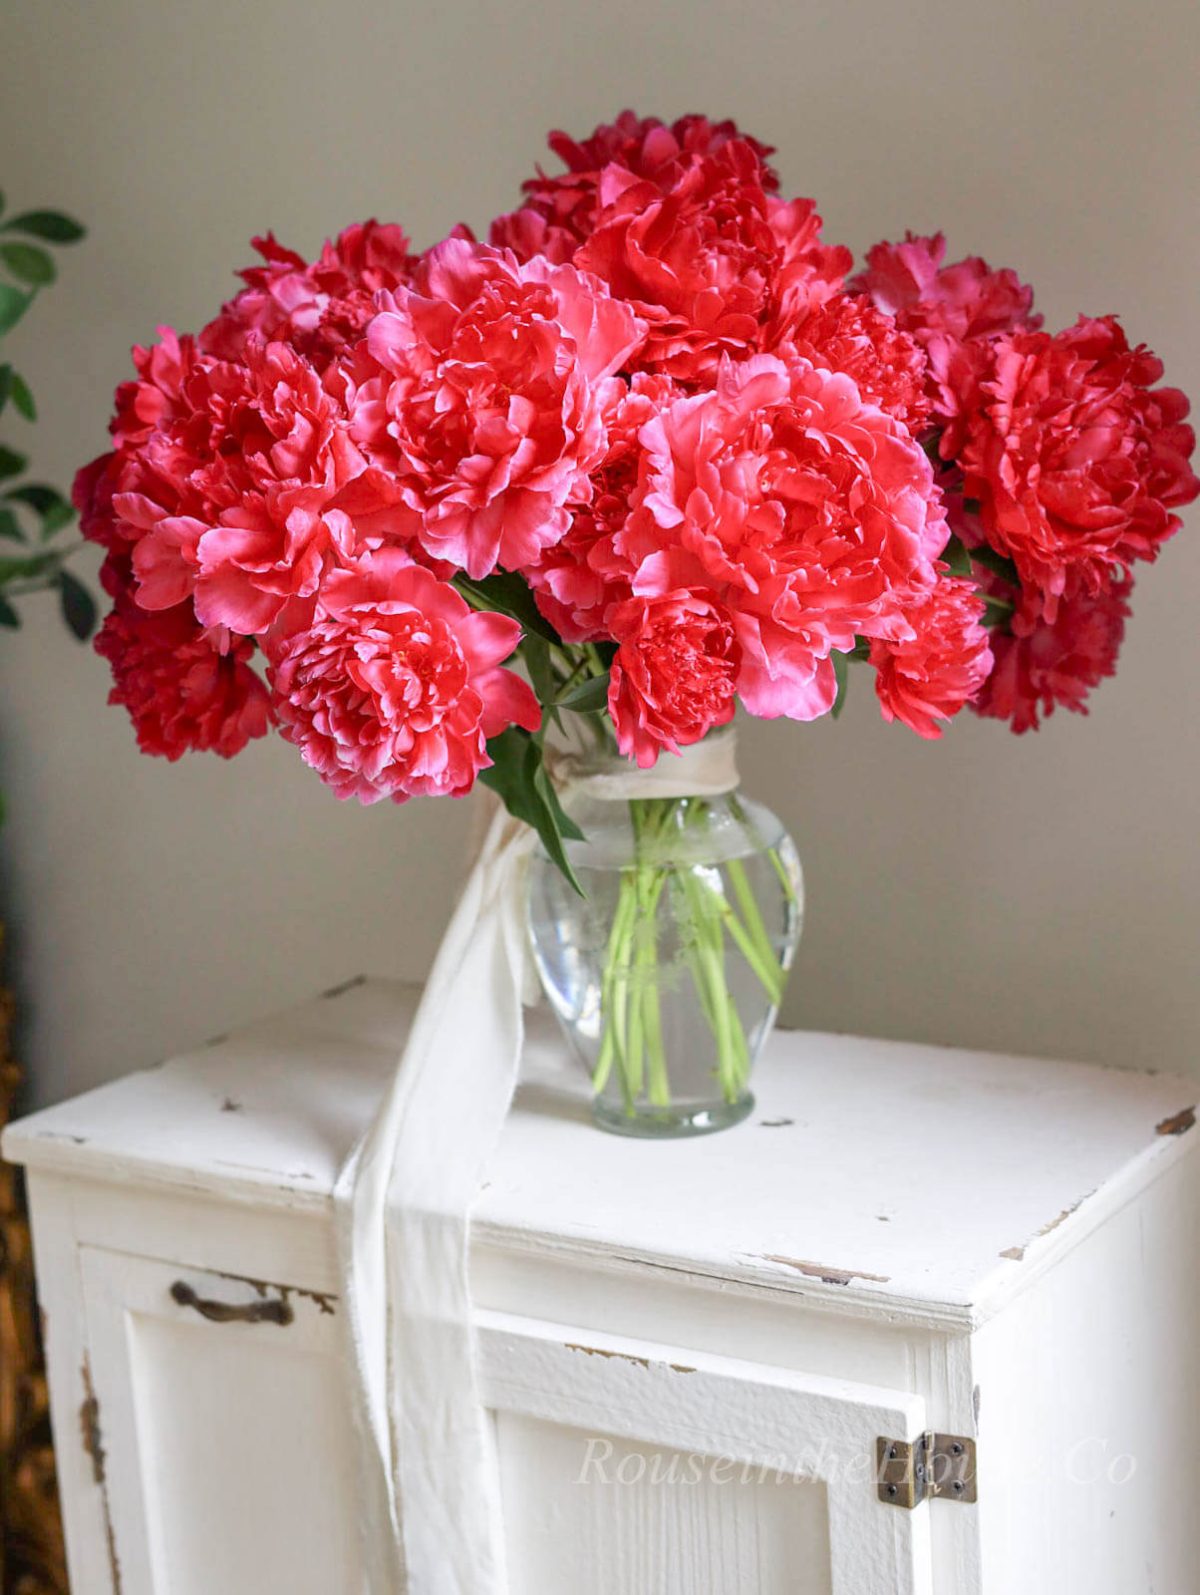 An enormous bouquet of pink peonies in an etched flower vase.